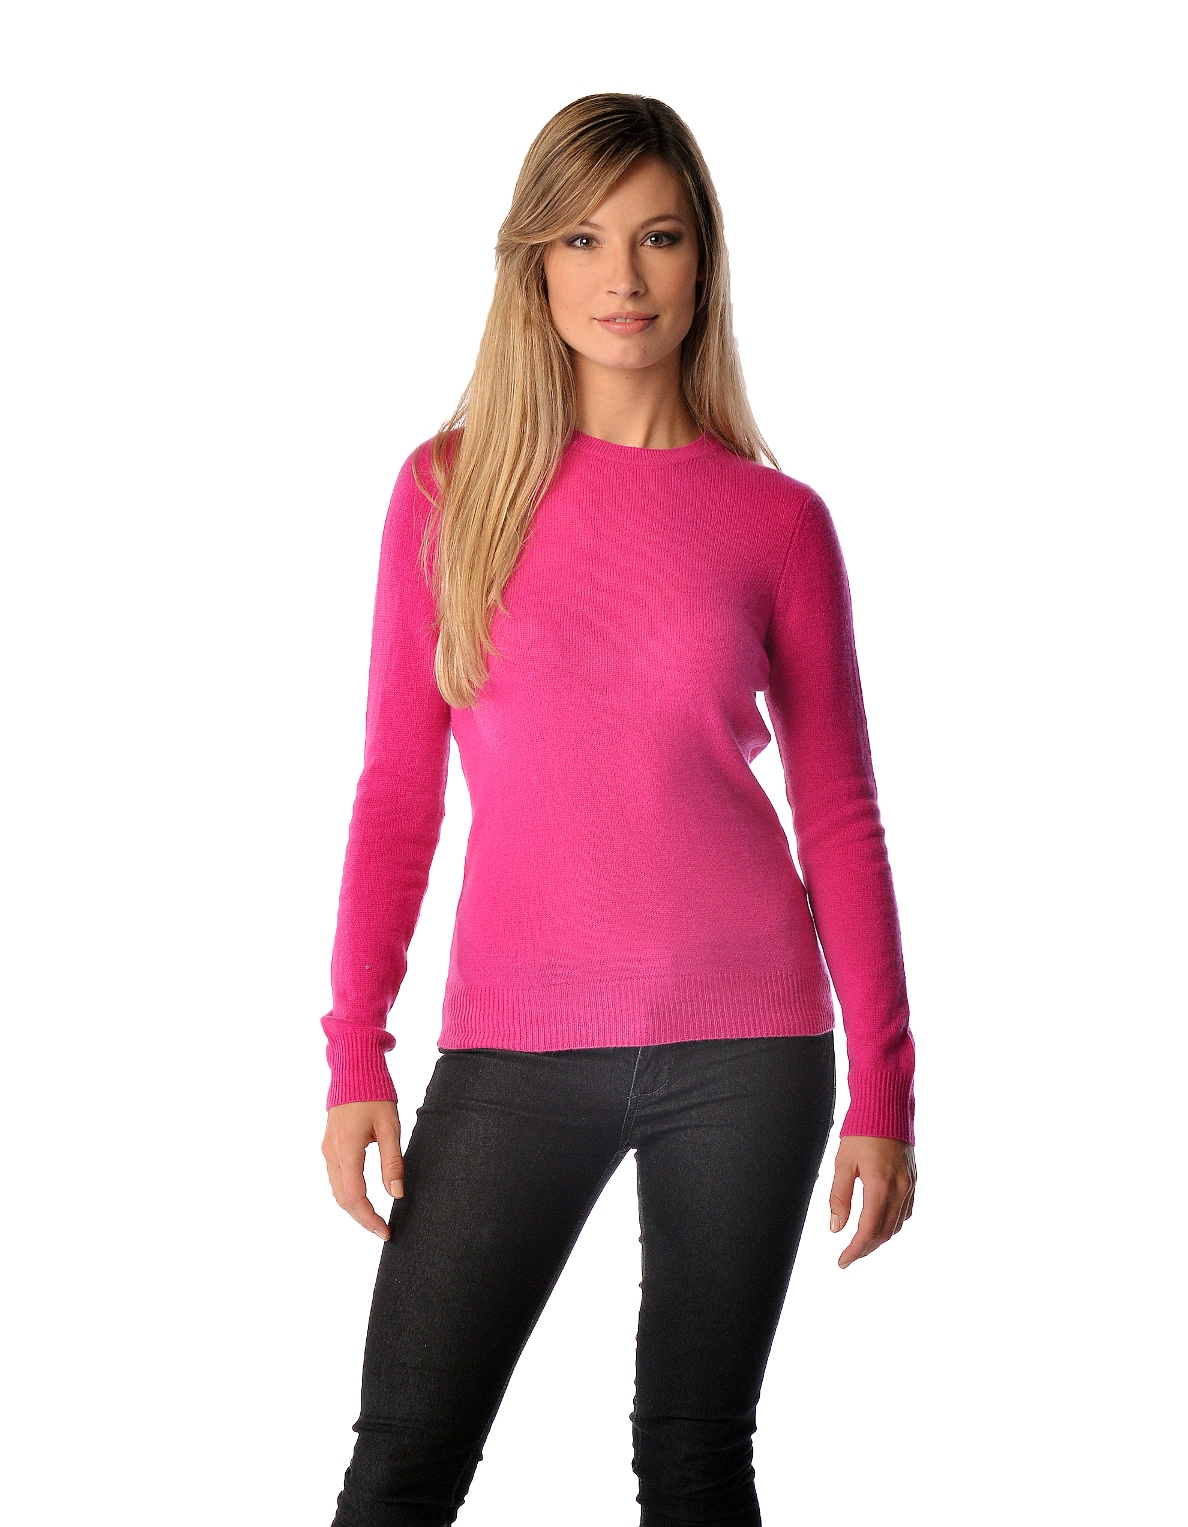 Pure Cashmere Crew Neck Spring Sweater for Women (Magenta Pink, Small)